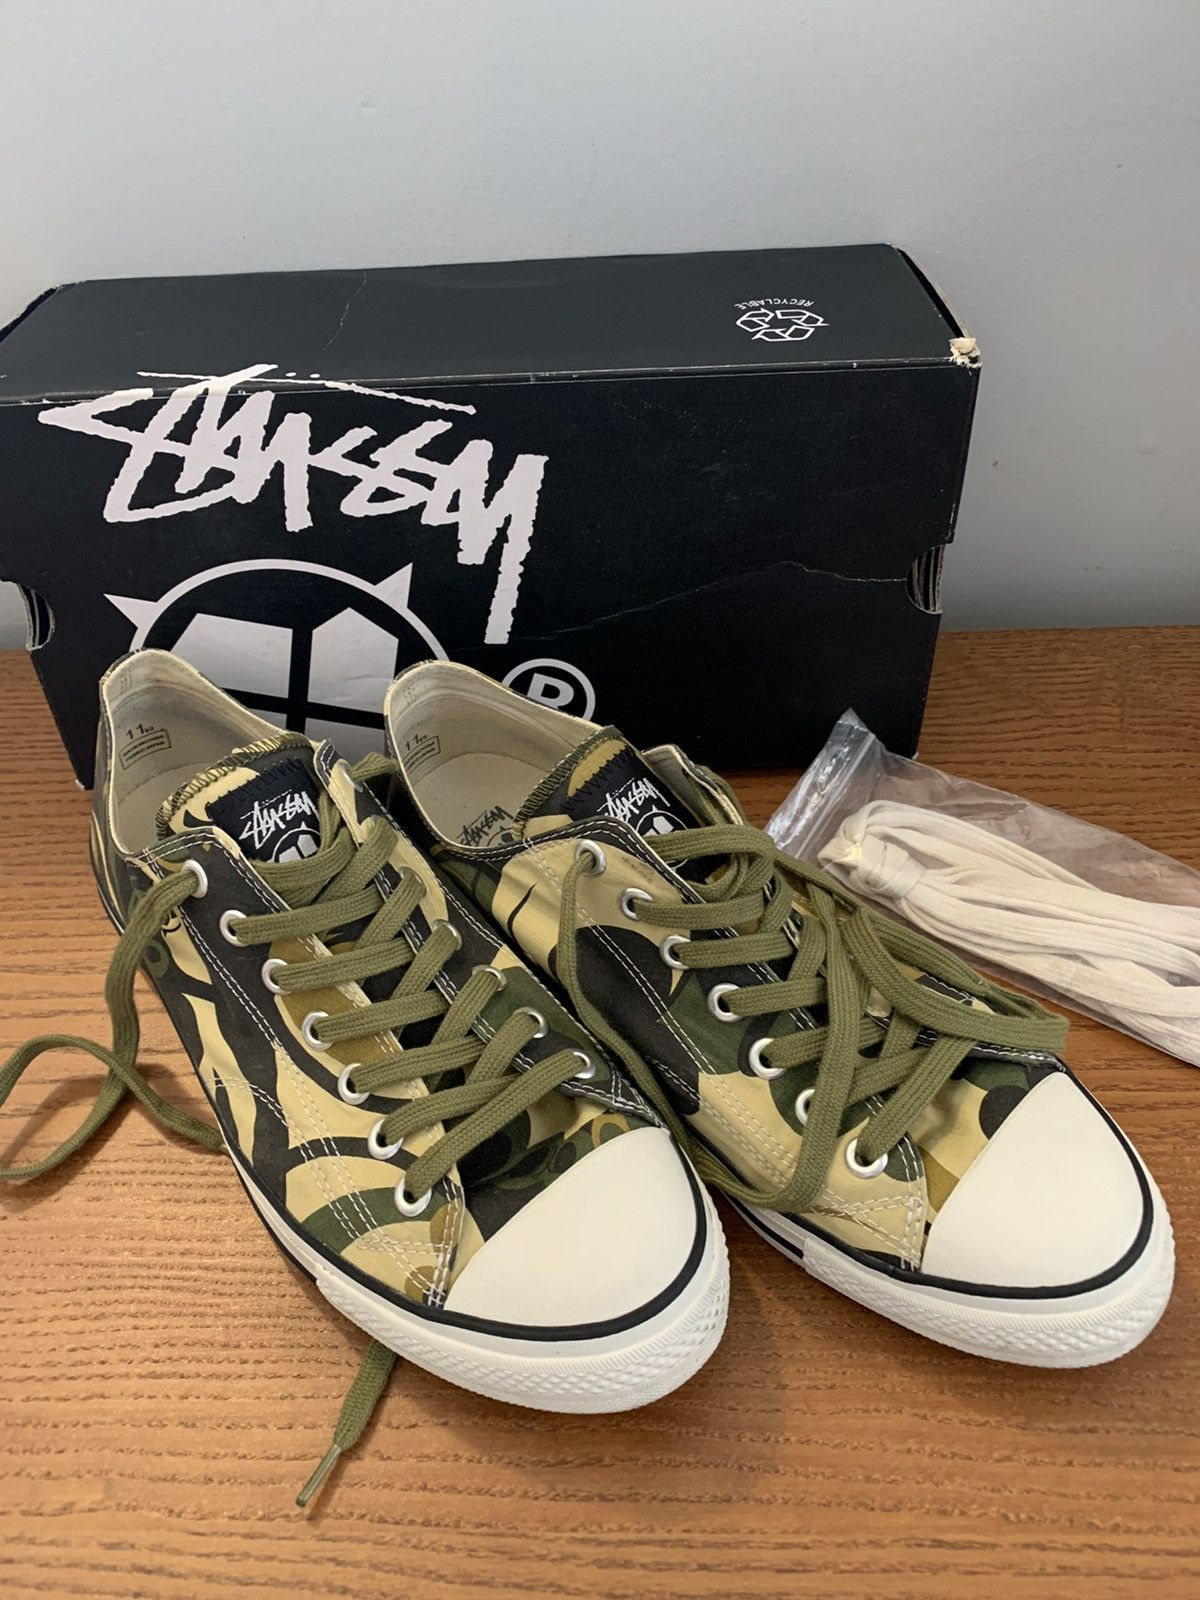 Stussy Stussy x TAS Barry lows, very rare Japanese sneakers | Grailed